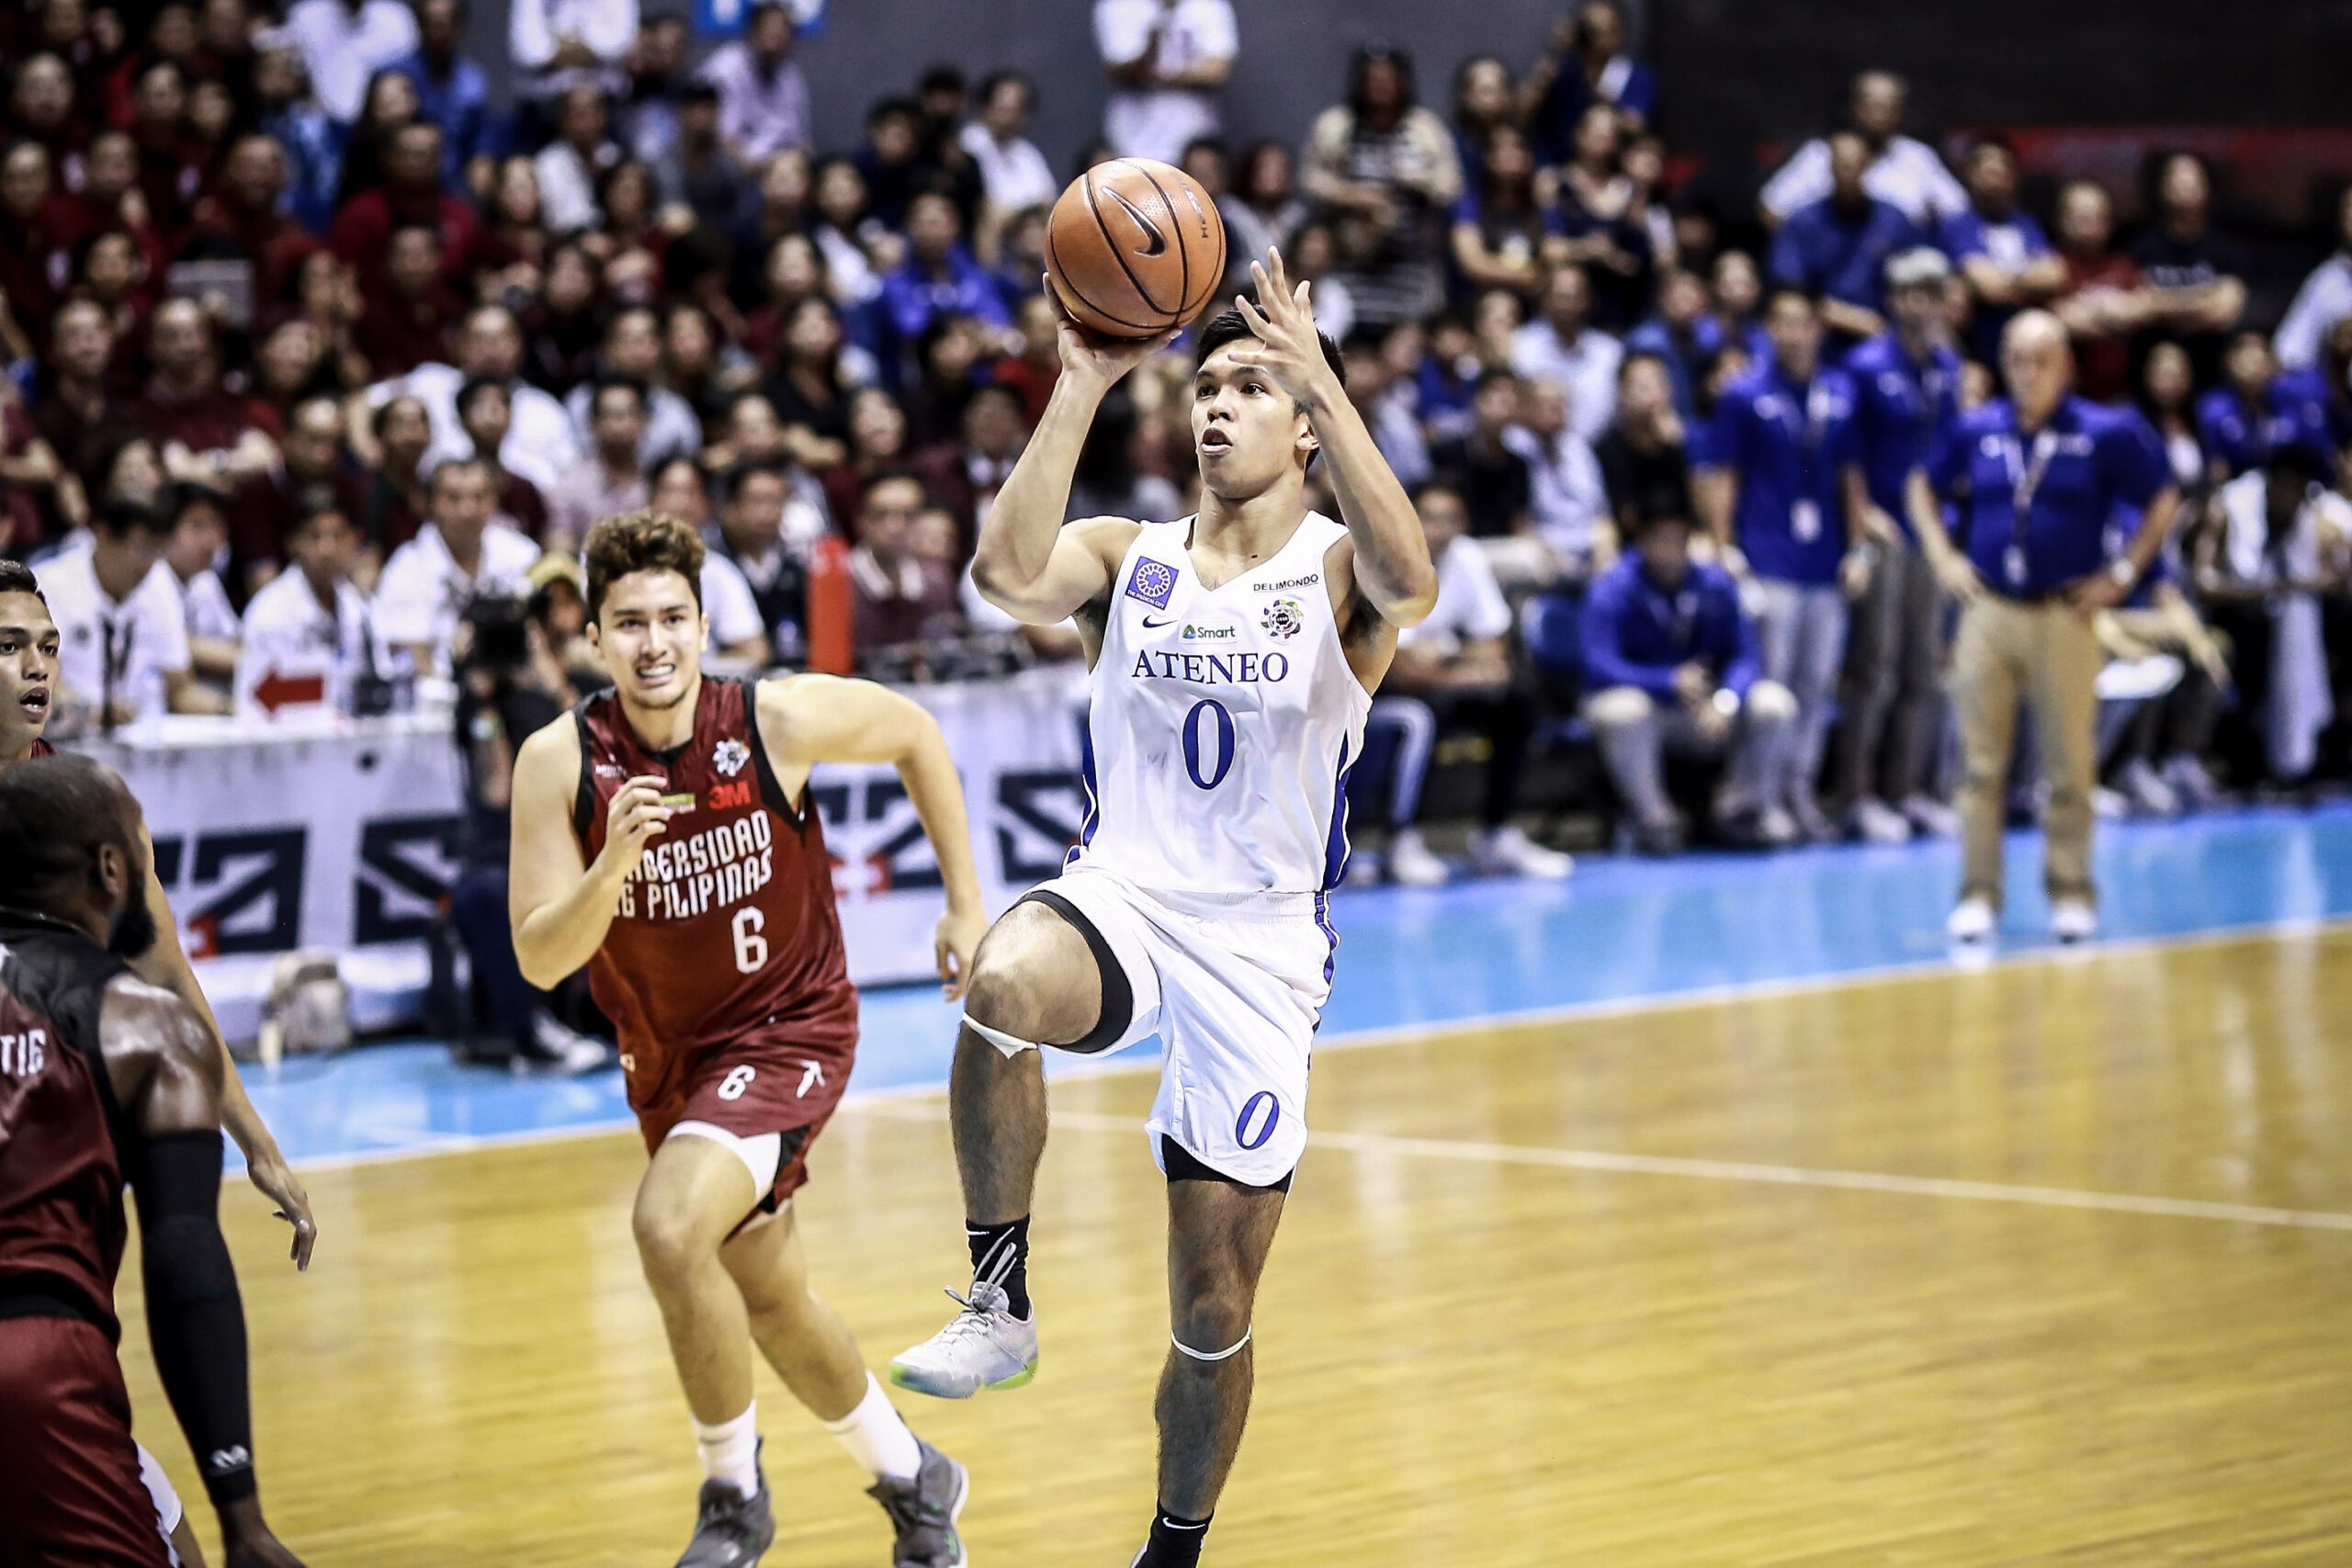 UAAP basketball to introduce ‘Video Review Initiative’ in Season 82